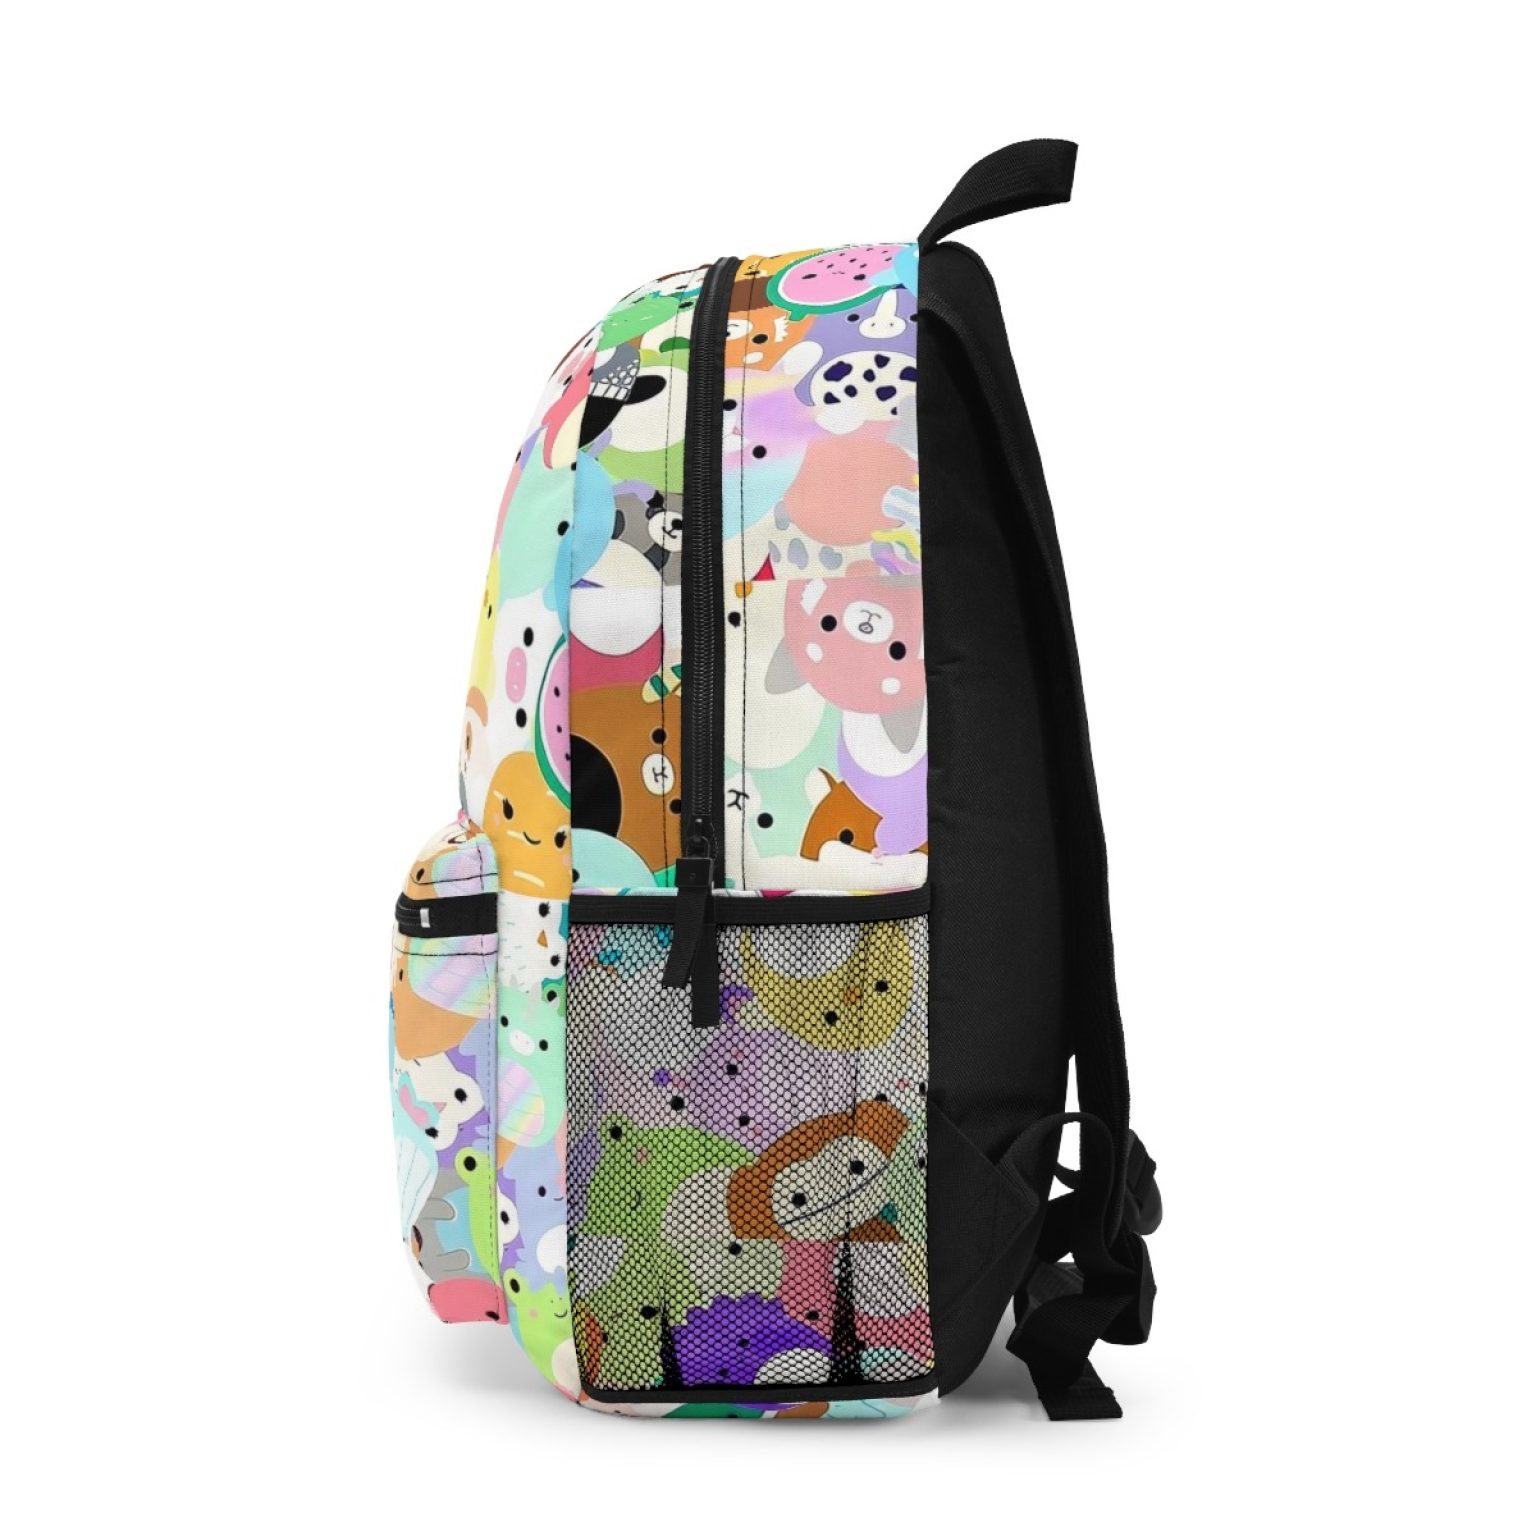 Buy Squishmallows Chaotic Frenzy Cute Squishmallow Artwork Backpack ⋆ ...